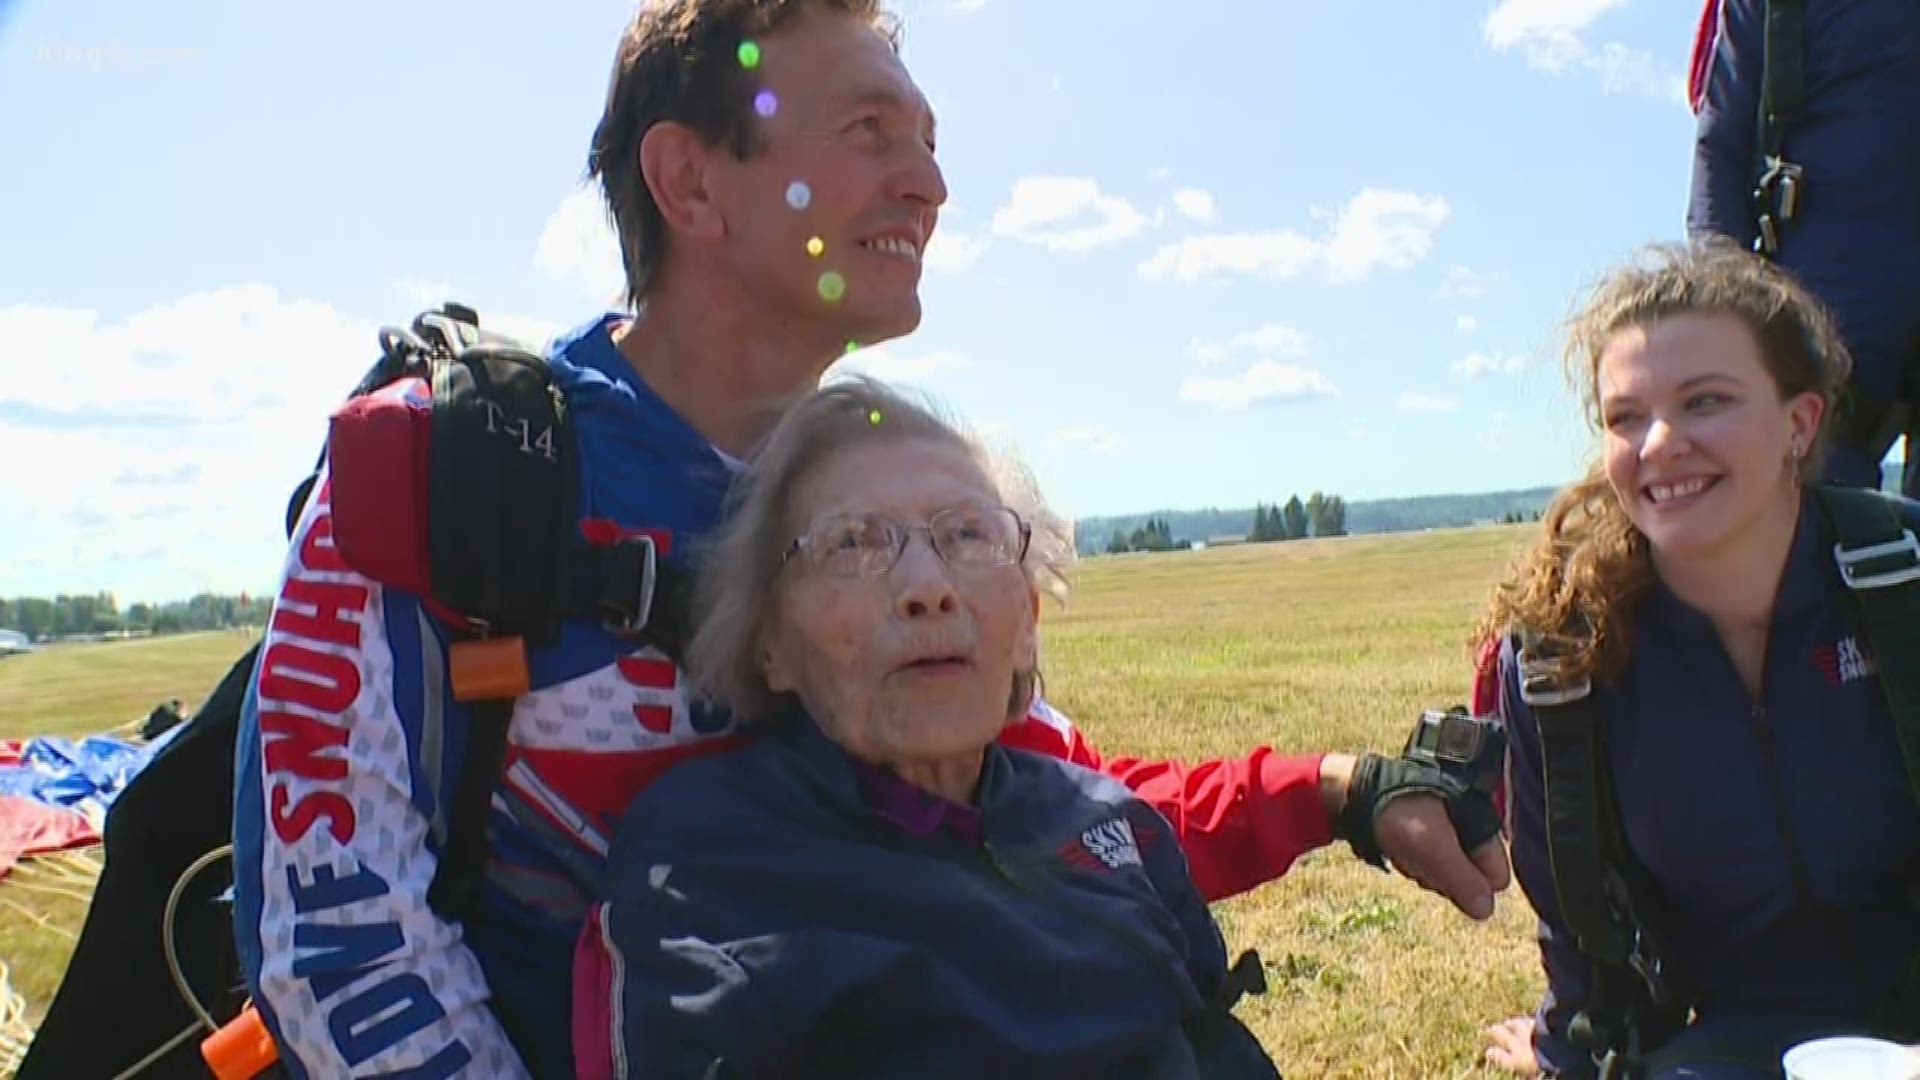 A Washington woman is attempting to break a world record by being the oldest person to skydive.